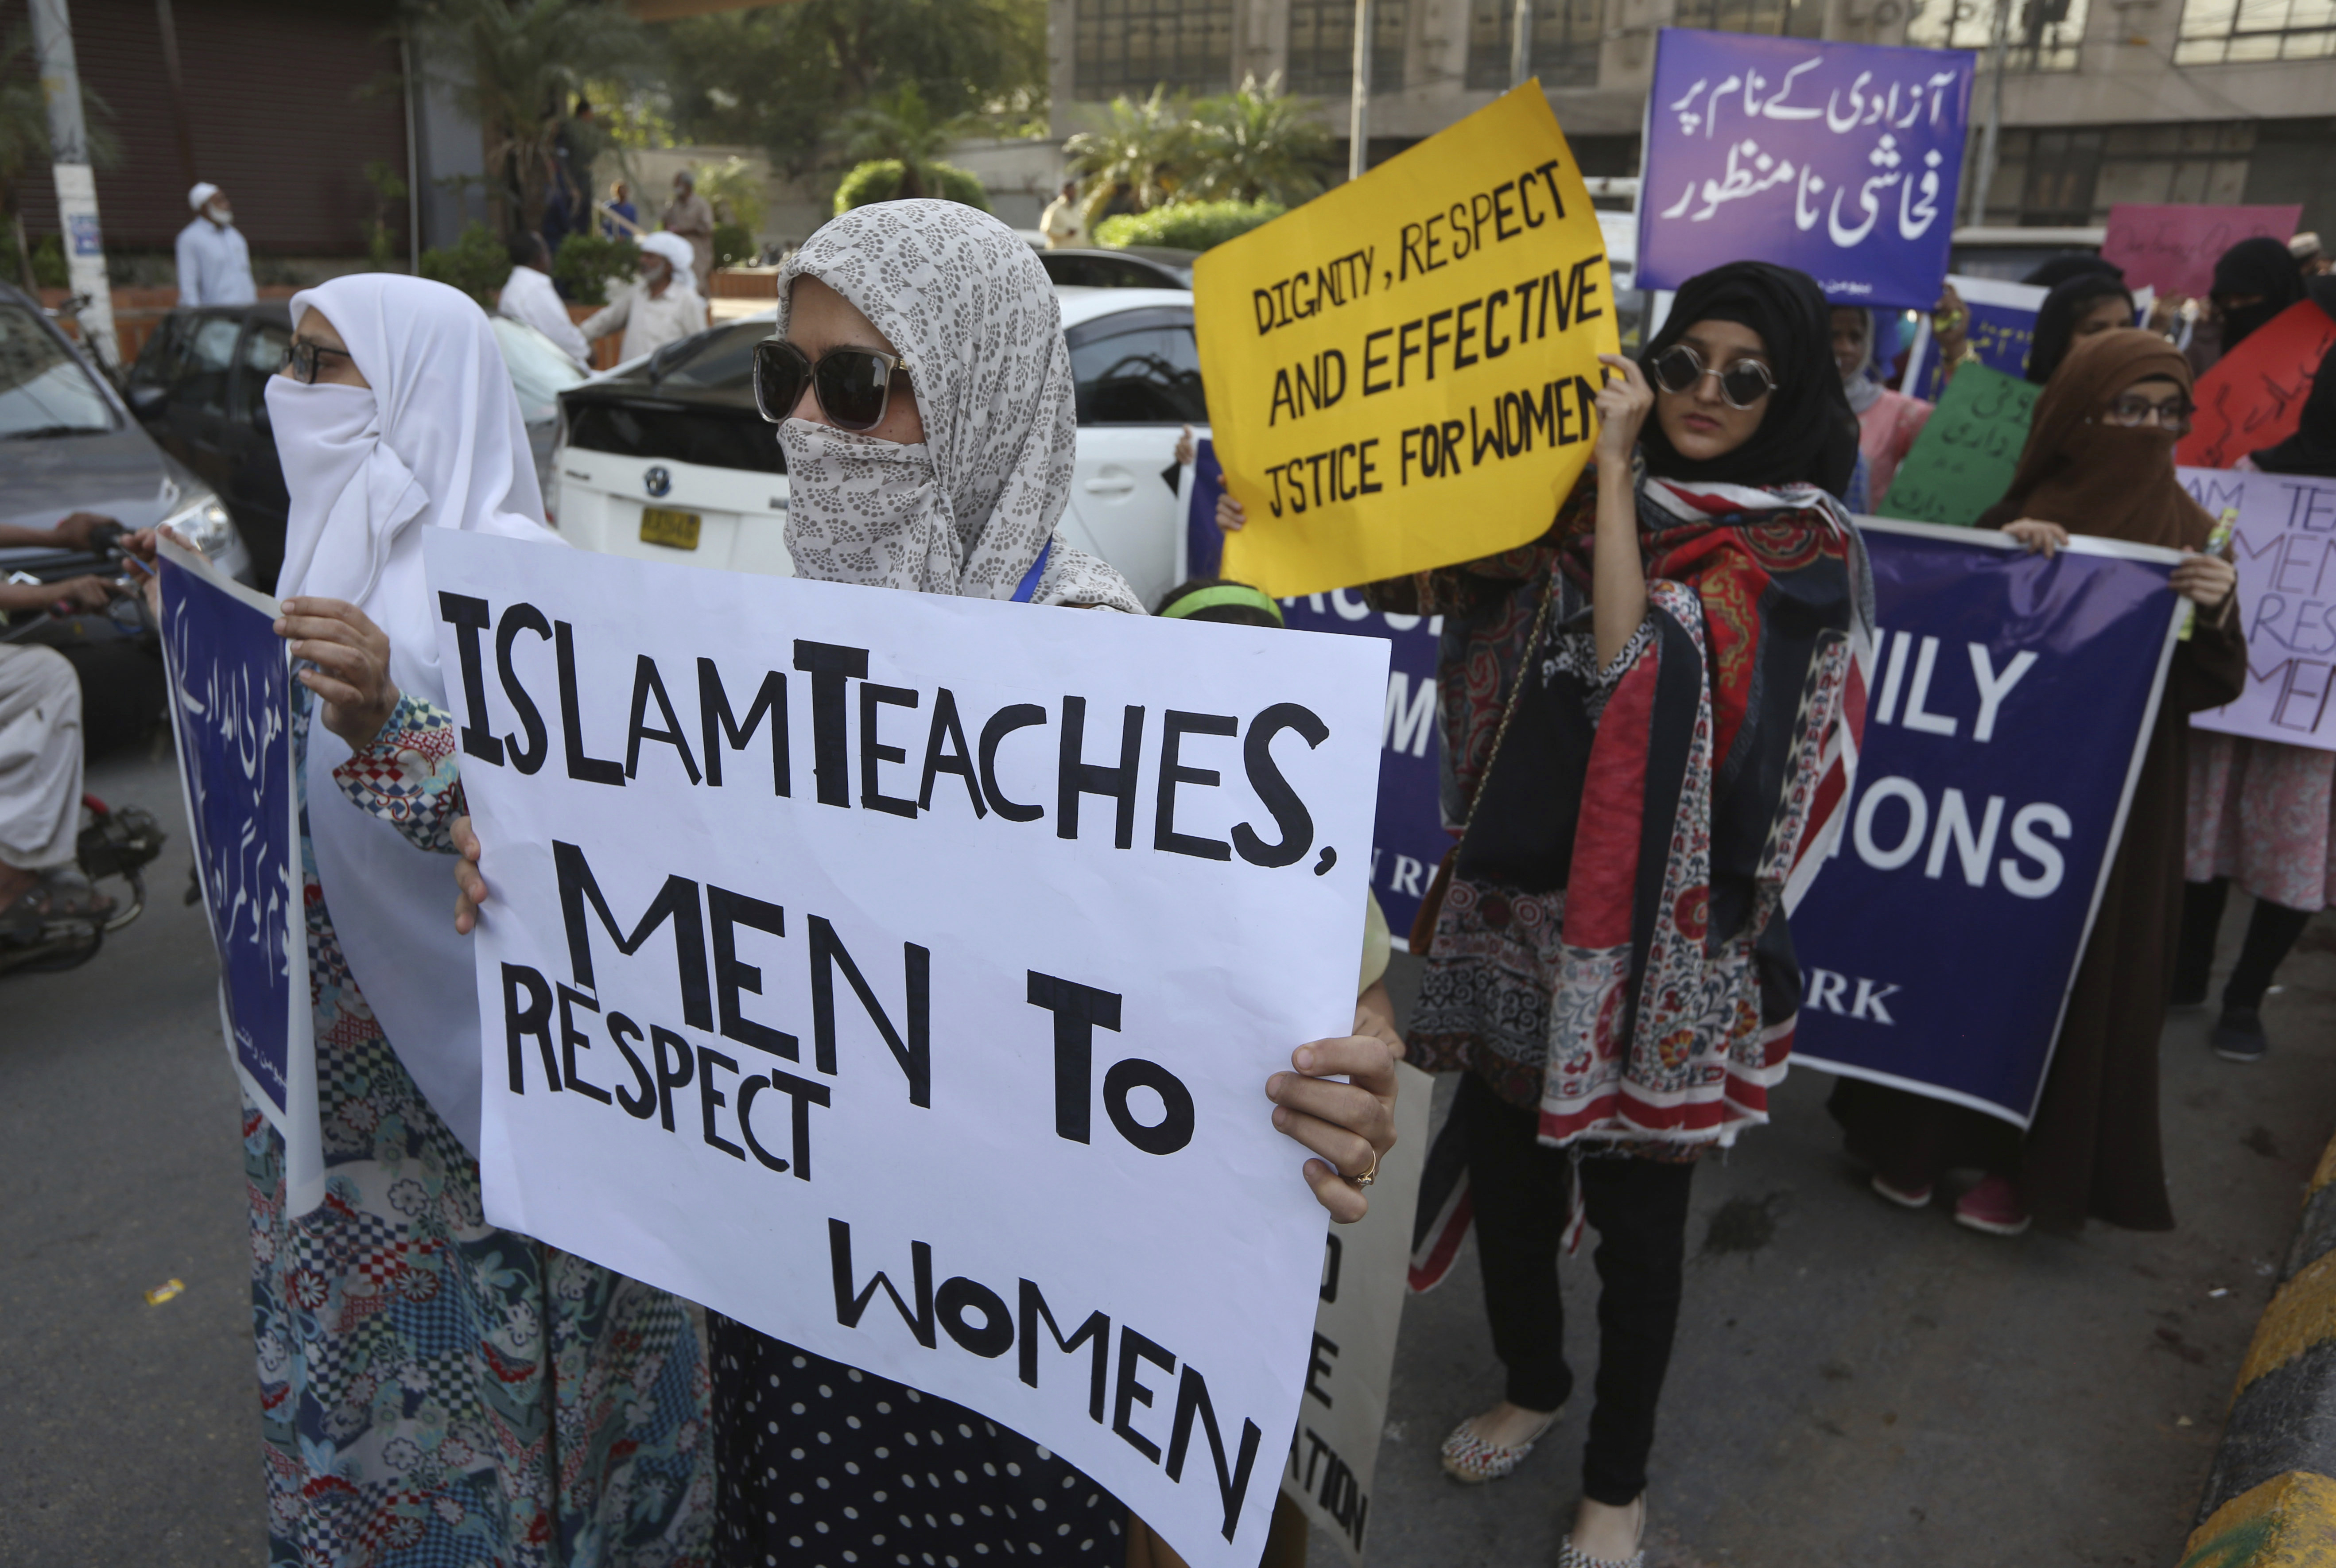 Pakistanis take party in a pro-women rally ahead of Women's Day in Karachi, Pakistan, Friday, March 6, 2020. Pakistani women plan to hold rallies across the country to celebrate International Women's Day to bring attention to their efforts to seek better jobs, protections in the work place and end domestic violence. (AP Photo/Fareed Khan)